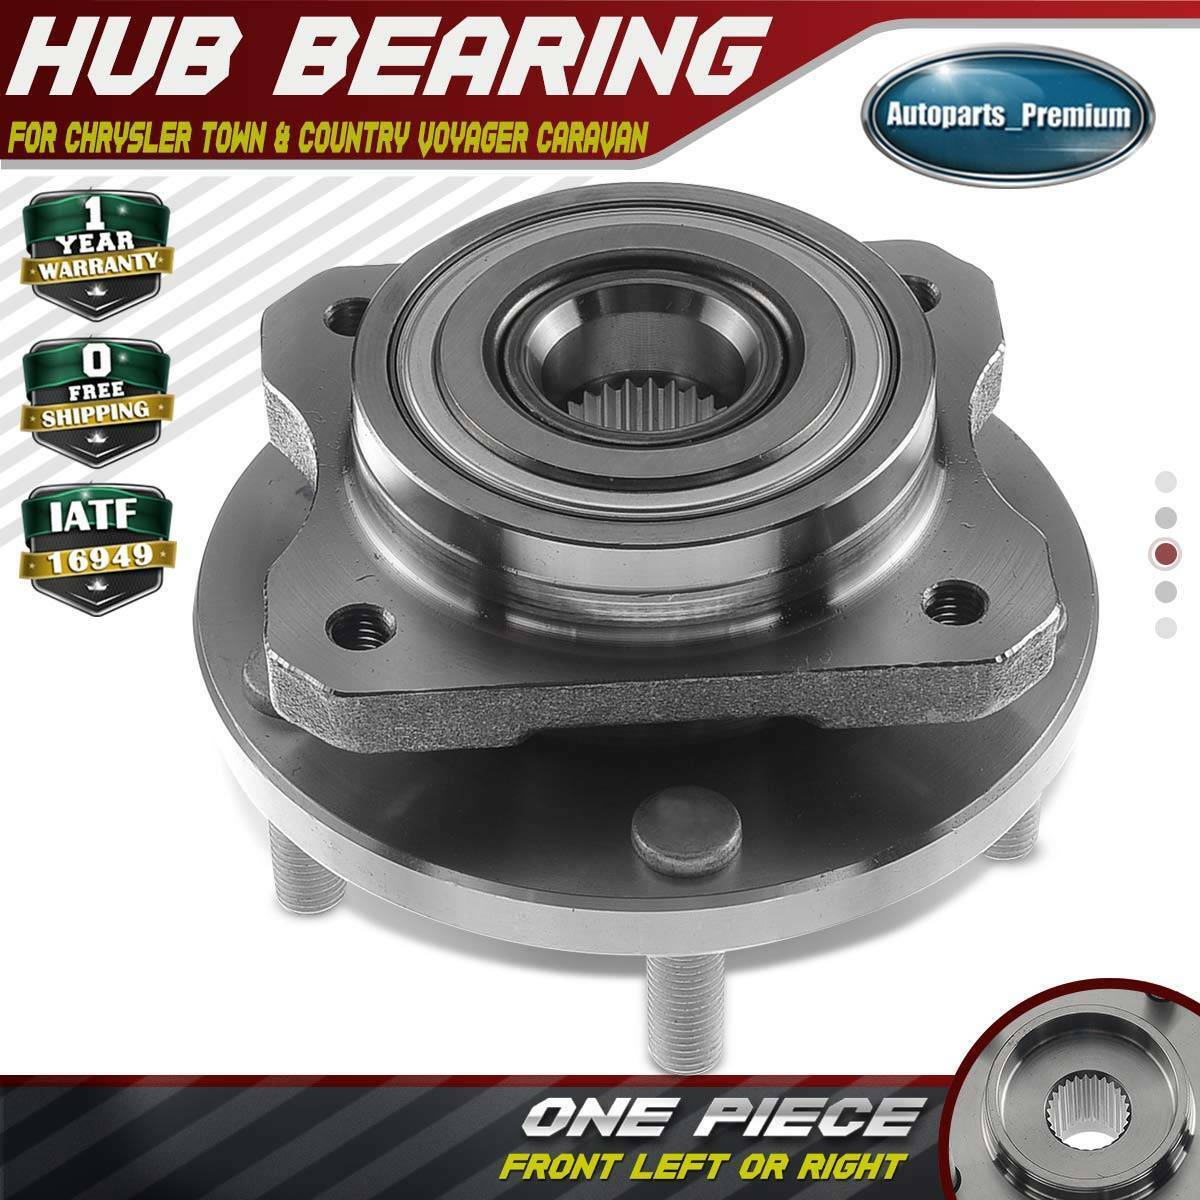 Front Wheel Hub & Bearing Assembly for Chrysler Town & Country Voyager Caravan